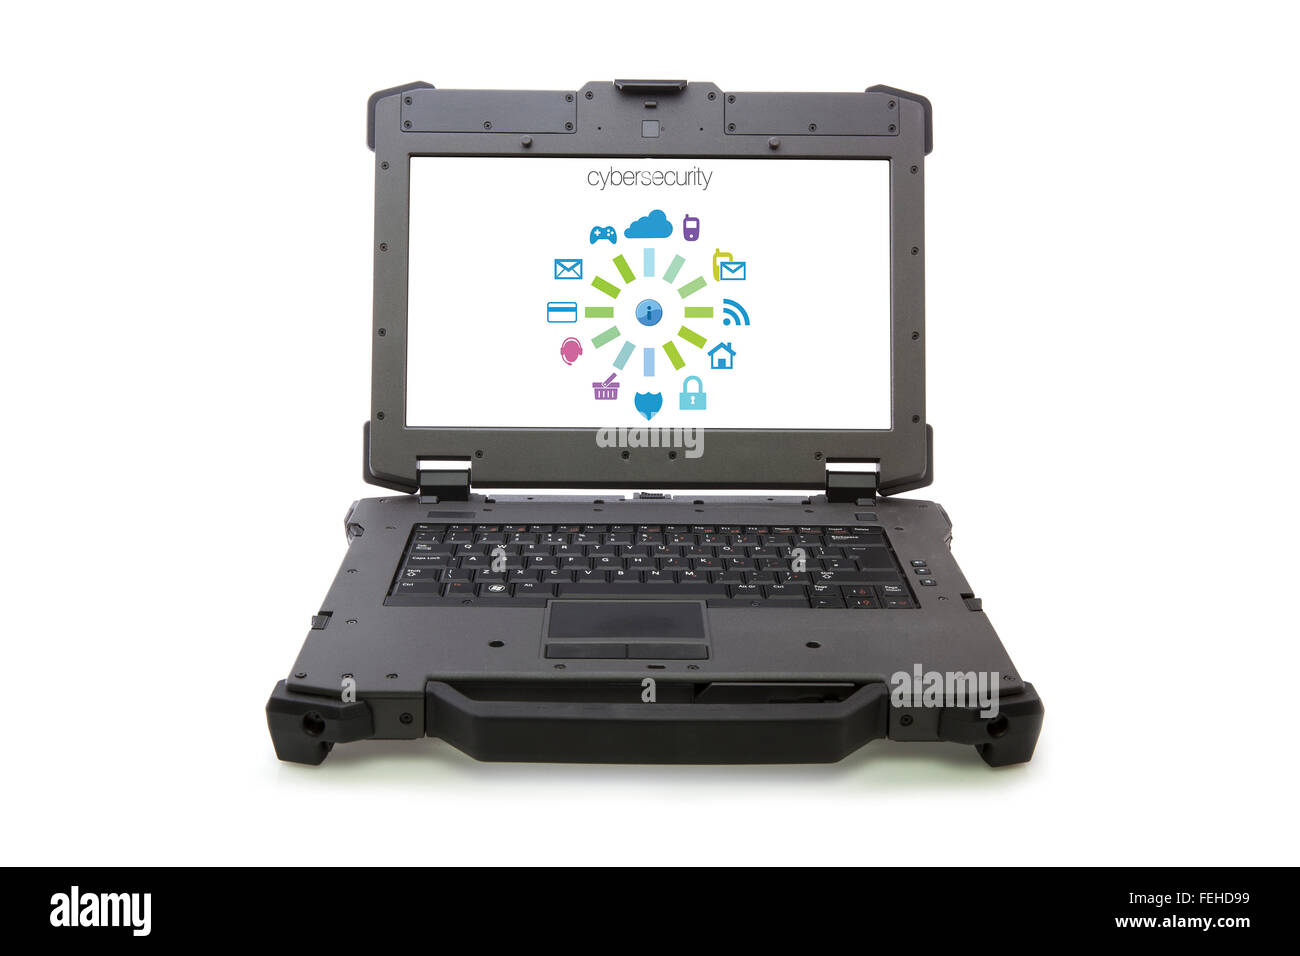 Open Rugged laptop with a Cyber security Screen Stock Photo